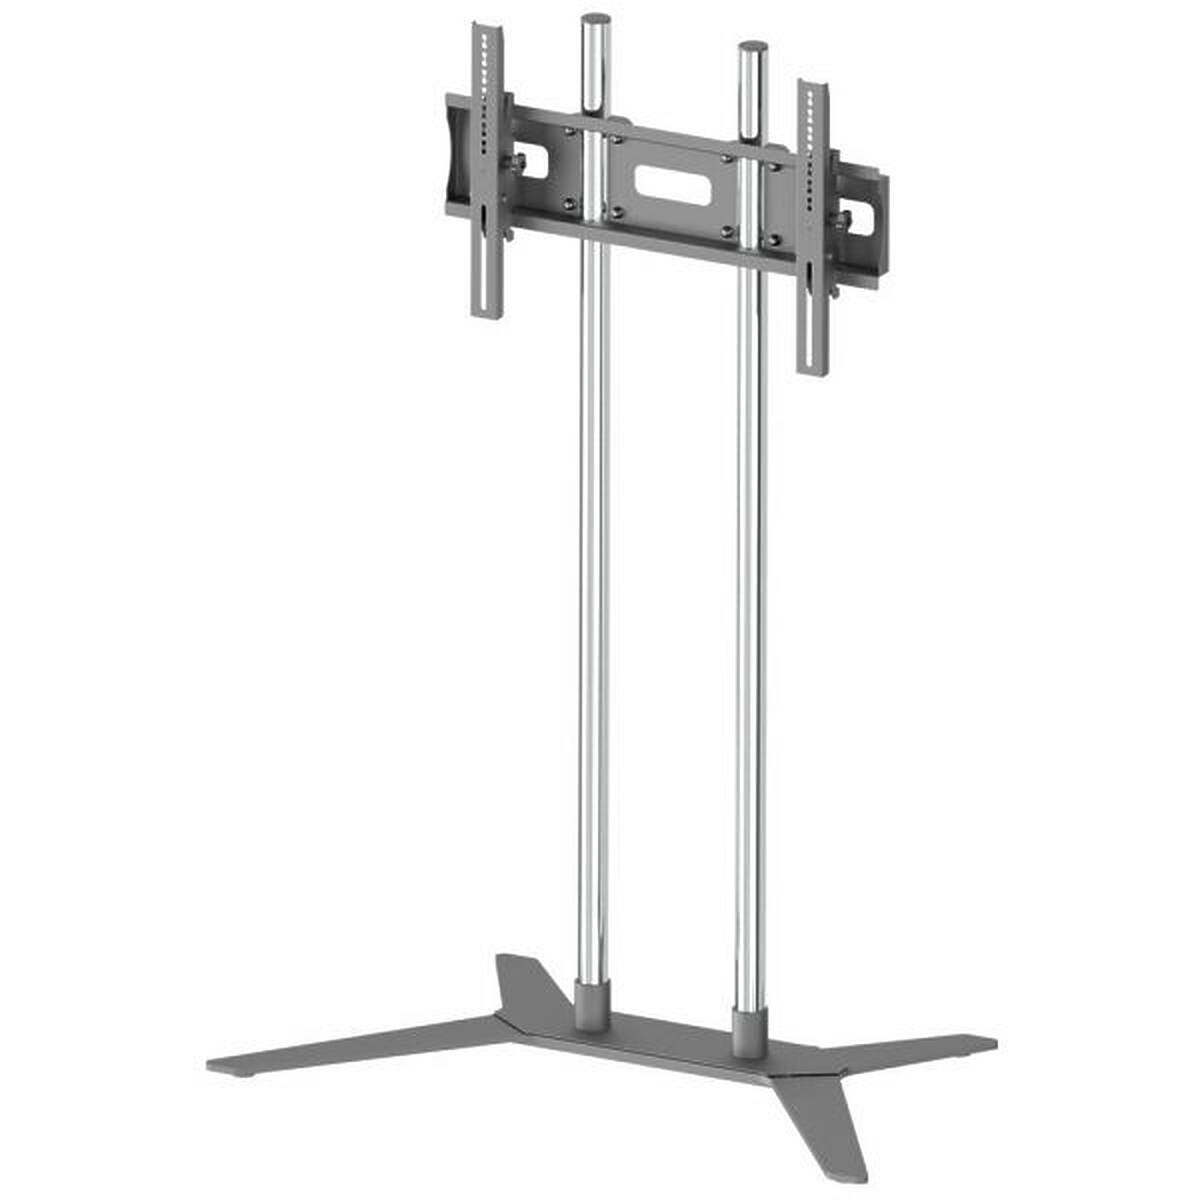 Edbak STD17 Universal Flat Screen Monitor Stand/Trolley for 37-60" screens product image. Click to enlarge.